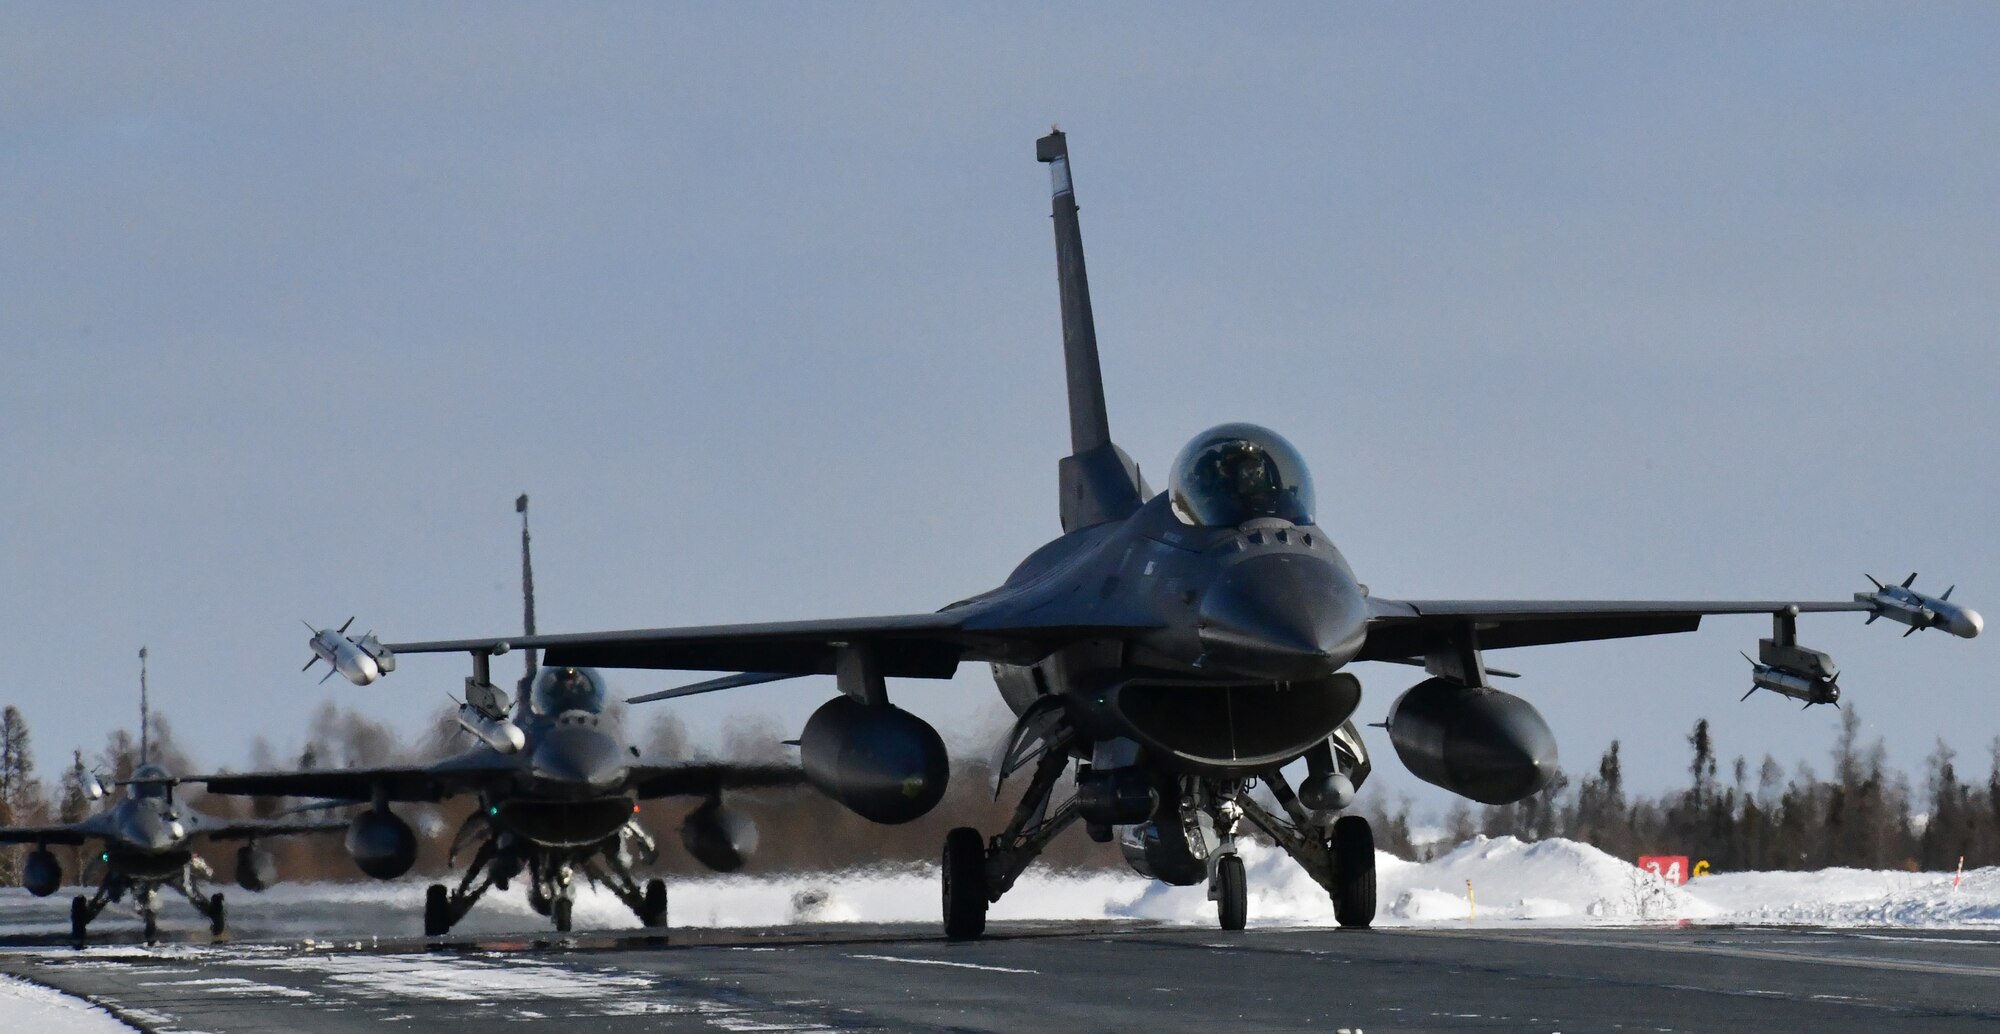 U.S. Air Force F-16’s from the Minnesota Air National Guard’s 148th Fighter Wing arrive at Yellowknife, Canada during North American Aerospace Defense Command’s Arctic air defense exercise, Amalgam Dart 21-02, March 20, 2021.